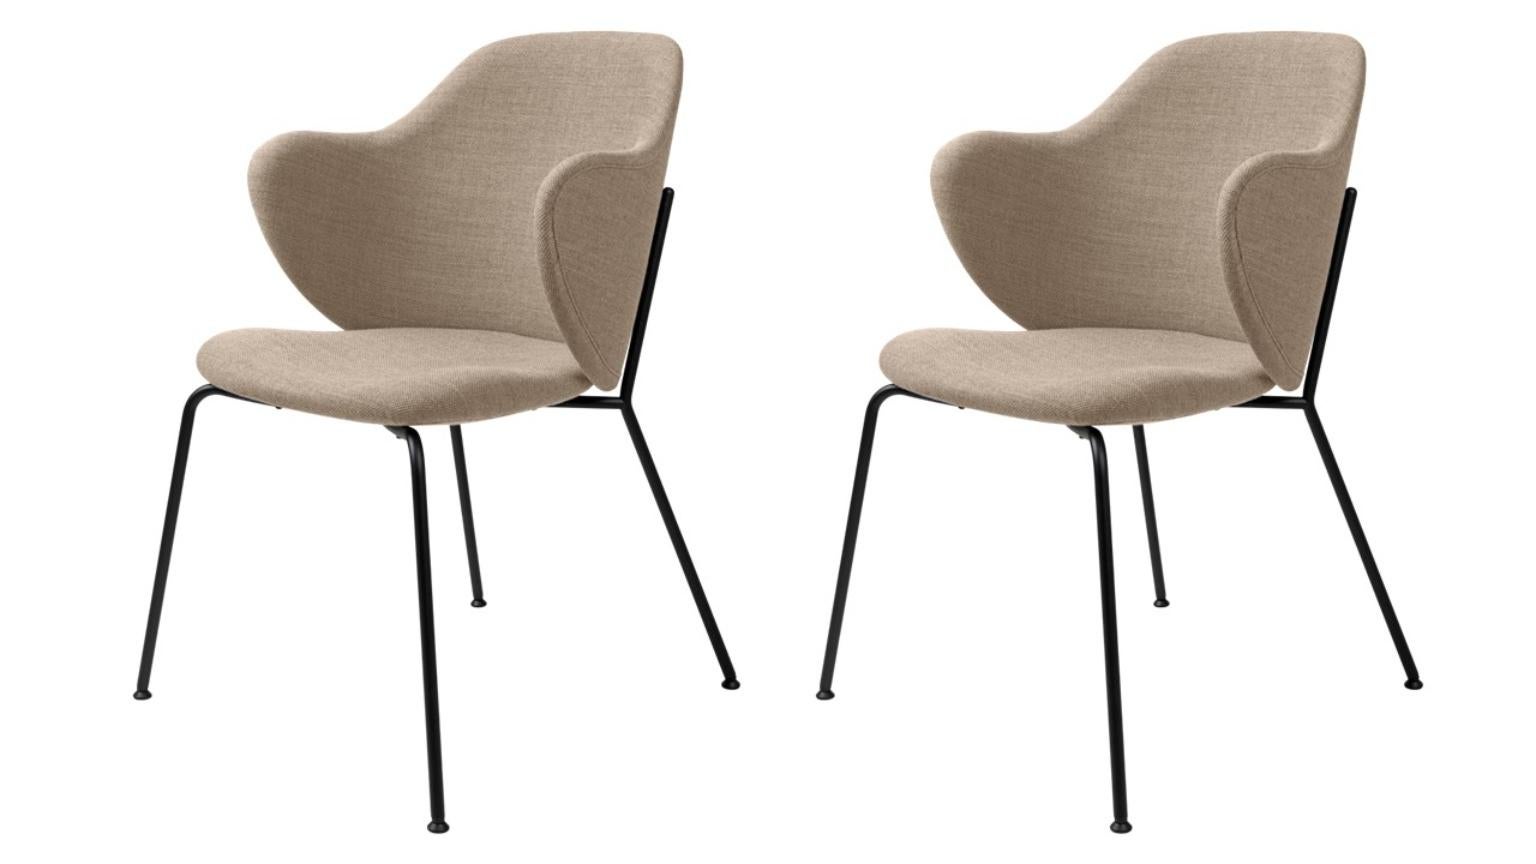 Set of 2 Beige fiord lassen chairs by Lassen.
Dimensions: W 58 x D 60 x H 88 cm.
Materials: Textile.

The Lassen chair by Flemming Lassen, Magnus Sangild and Marianne Viktor was launched in 2018 as an ode to Flemming Lassen’s uncompromising